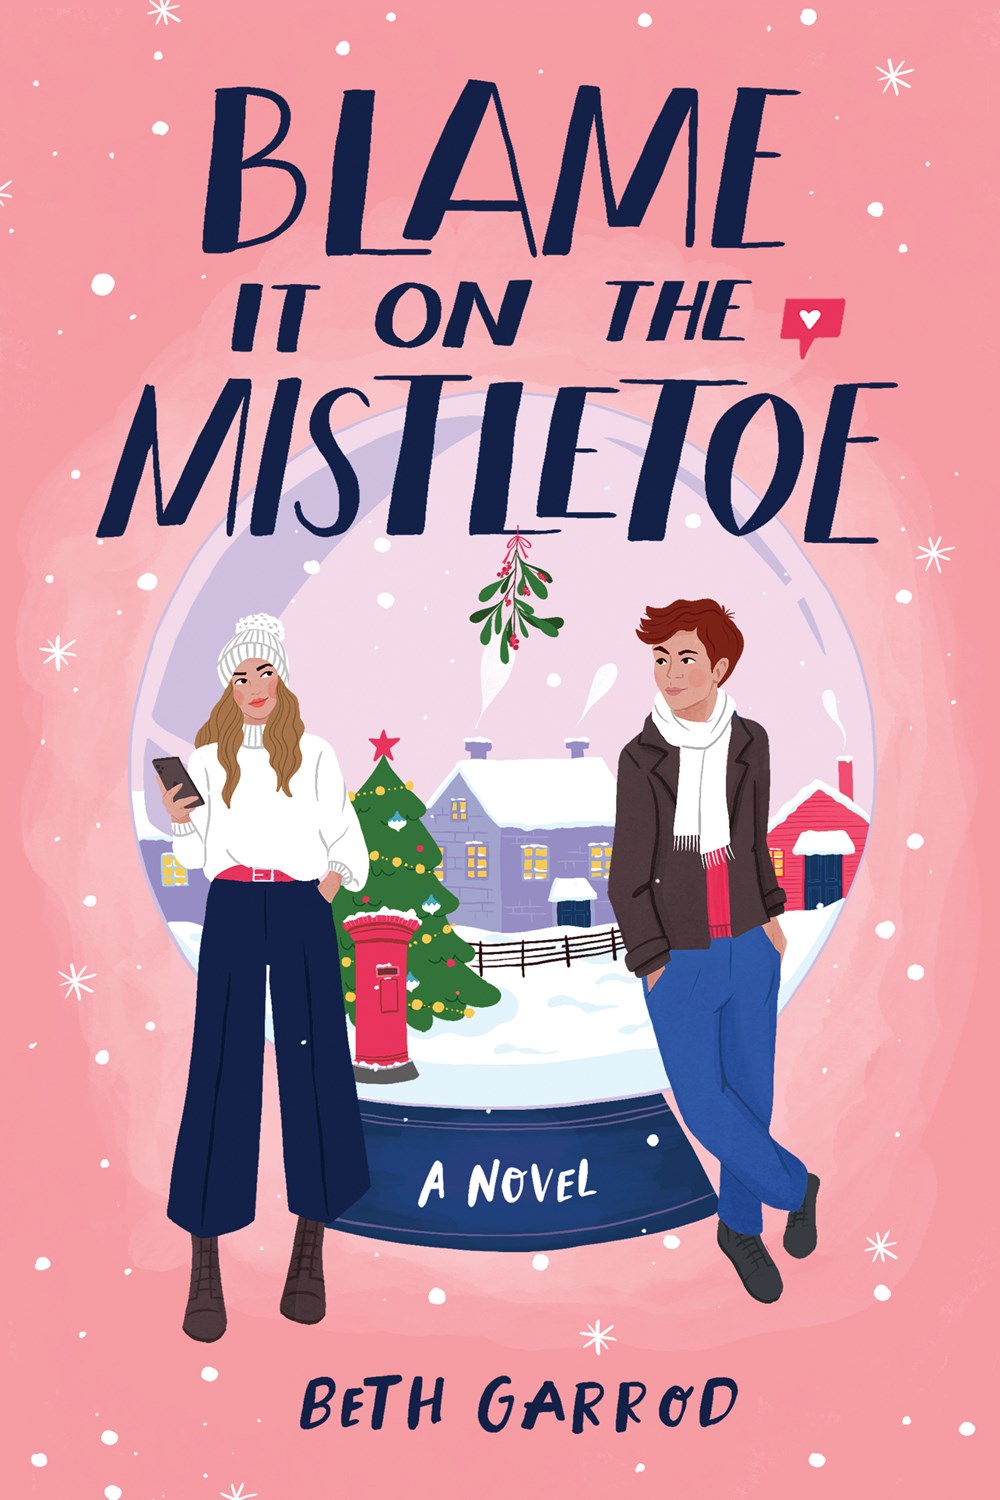 Book Cover for "Blame It on the Mistletoe" by Beth Garrod